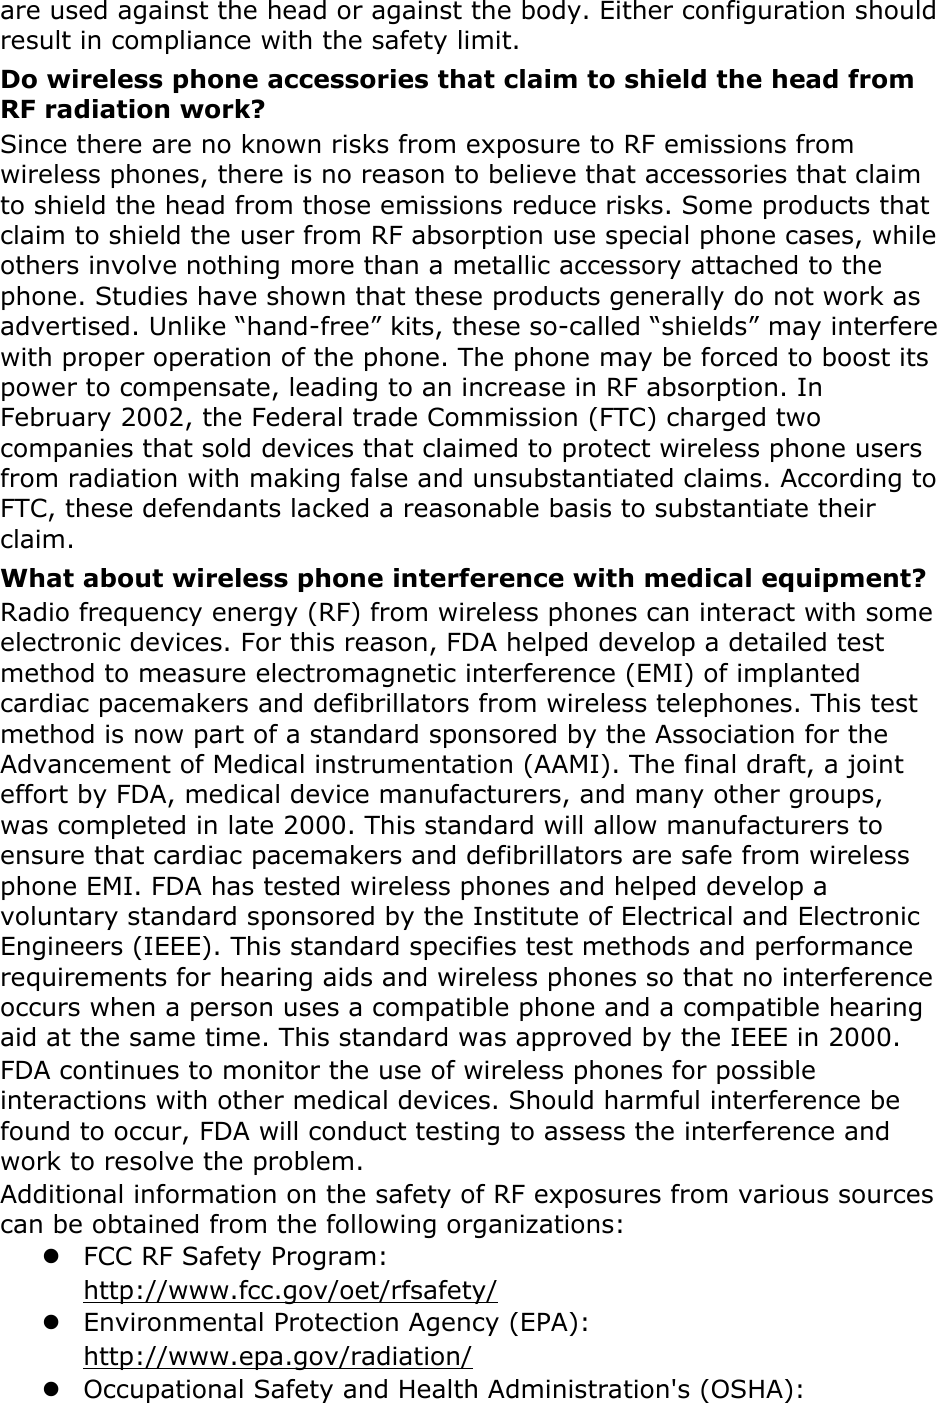 are used against the head or against the body. Either configuration should result in compliance with the safety limit. Do wireless phone accessories that claim to shield the head from RF radiation work? Since there are no known risks from exposure to RF emissions from wireless phones, there is no reason to believe that accessories that claim to shield the head from those emissions reduce risks. Some products that claim to shield the user from RF absorption use special phone cases, while others involve nothing more than a metallic accessory attached to the phone. Studies have shown that these products generally do not work as advertised. Unlike “hand-free” kits, these so-called “shields” may interfere with proper operation of the phone. The phone may be forced to boost its power to compensate, leading to an increase in RF absorption. In February 2002, the Federal trade Commission (FTC) charged two companies that sold devices that claimed to protect wireless phone users from radiation with making false and unsubstantiated claims. According to FTC, these defendants lacked a reasonable basis to substantiate their claim. What about wireless phone interference with medical equipment? Radio frequency energy (RF) from wireless phones can interact with some electronic devices. For this reason, FDA helped develop a detailed test method to measure electromagnetic interference (EMI) of implanted cardiac pacemakers and defibrillators from wireless telephones. This test method is now part of a standard sponsored by the Association for the Advancement of Medical instrumentation (AAMI). The final draft, a joint effort by FDA, medical device manufacturers, and many other groups, was completed in late 2000. This standard will allow manufacturers to ensure that cardiac pacemakers and defibrillators are safe from wireless phone EMI. FDA has tested wireless phones and helped develop a voluntary standard sponsored by the Institute of Electrical and Electronic Engineers (IEEE). This standard specifies test methods and performance requirements for hearing aids and wireless phones so that no interference occurs when a person uses a compatible phone and a compatible hearing aid at the same time. This standard was approved by the IEEE in 2000. FDA continues to monitor the use of wireless phones for possible interactions with other medical devices. Should harmful interference be found to occur, FDA will conduct testing to assess the interference and work to resolve the problem. Additional information on the safety of RF exposures from various sources can be obtained from the following organizations:  FCC RF Safety Program:   http://www.fcc.gov/oet/rfsafety/  Environmental Protection Agency (EPA):   http://www.epa.gov/radiation/  Occupational Safety and Health Administration&apos;s (OSHA):   